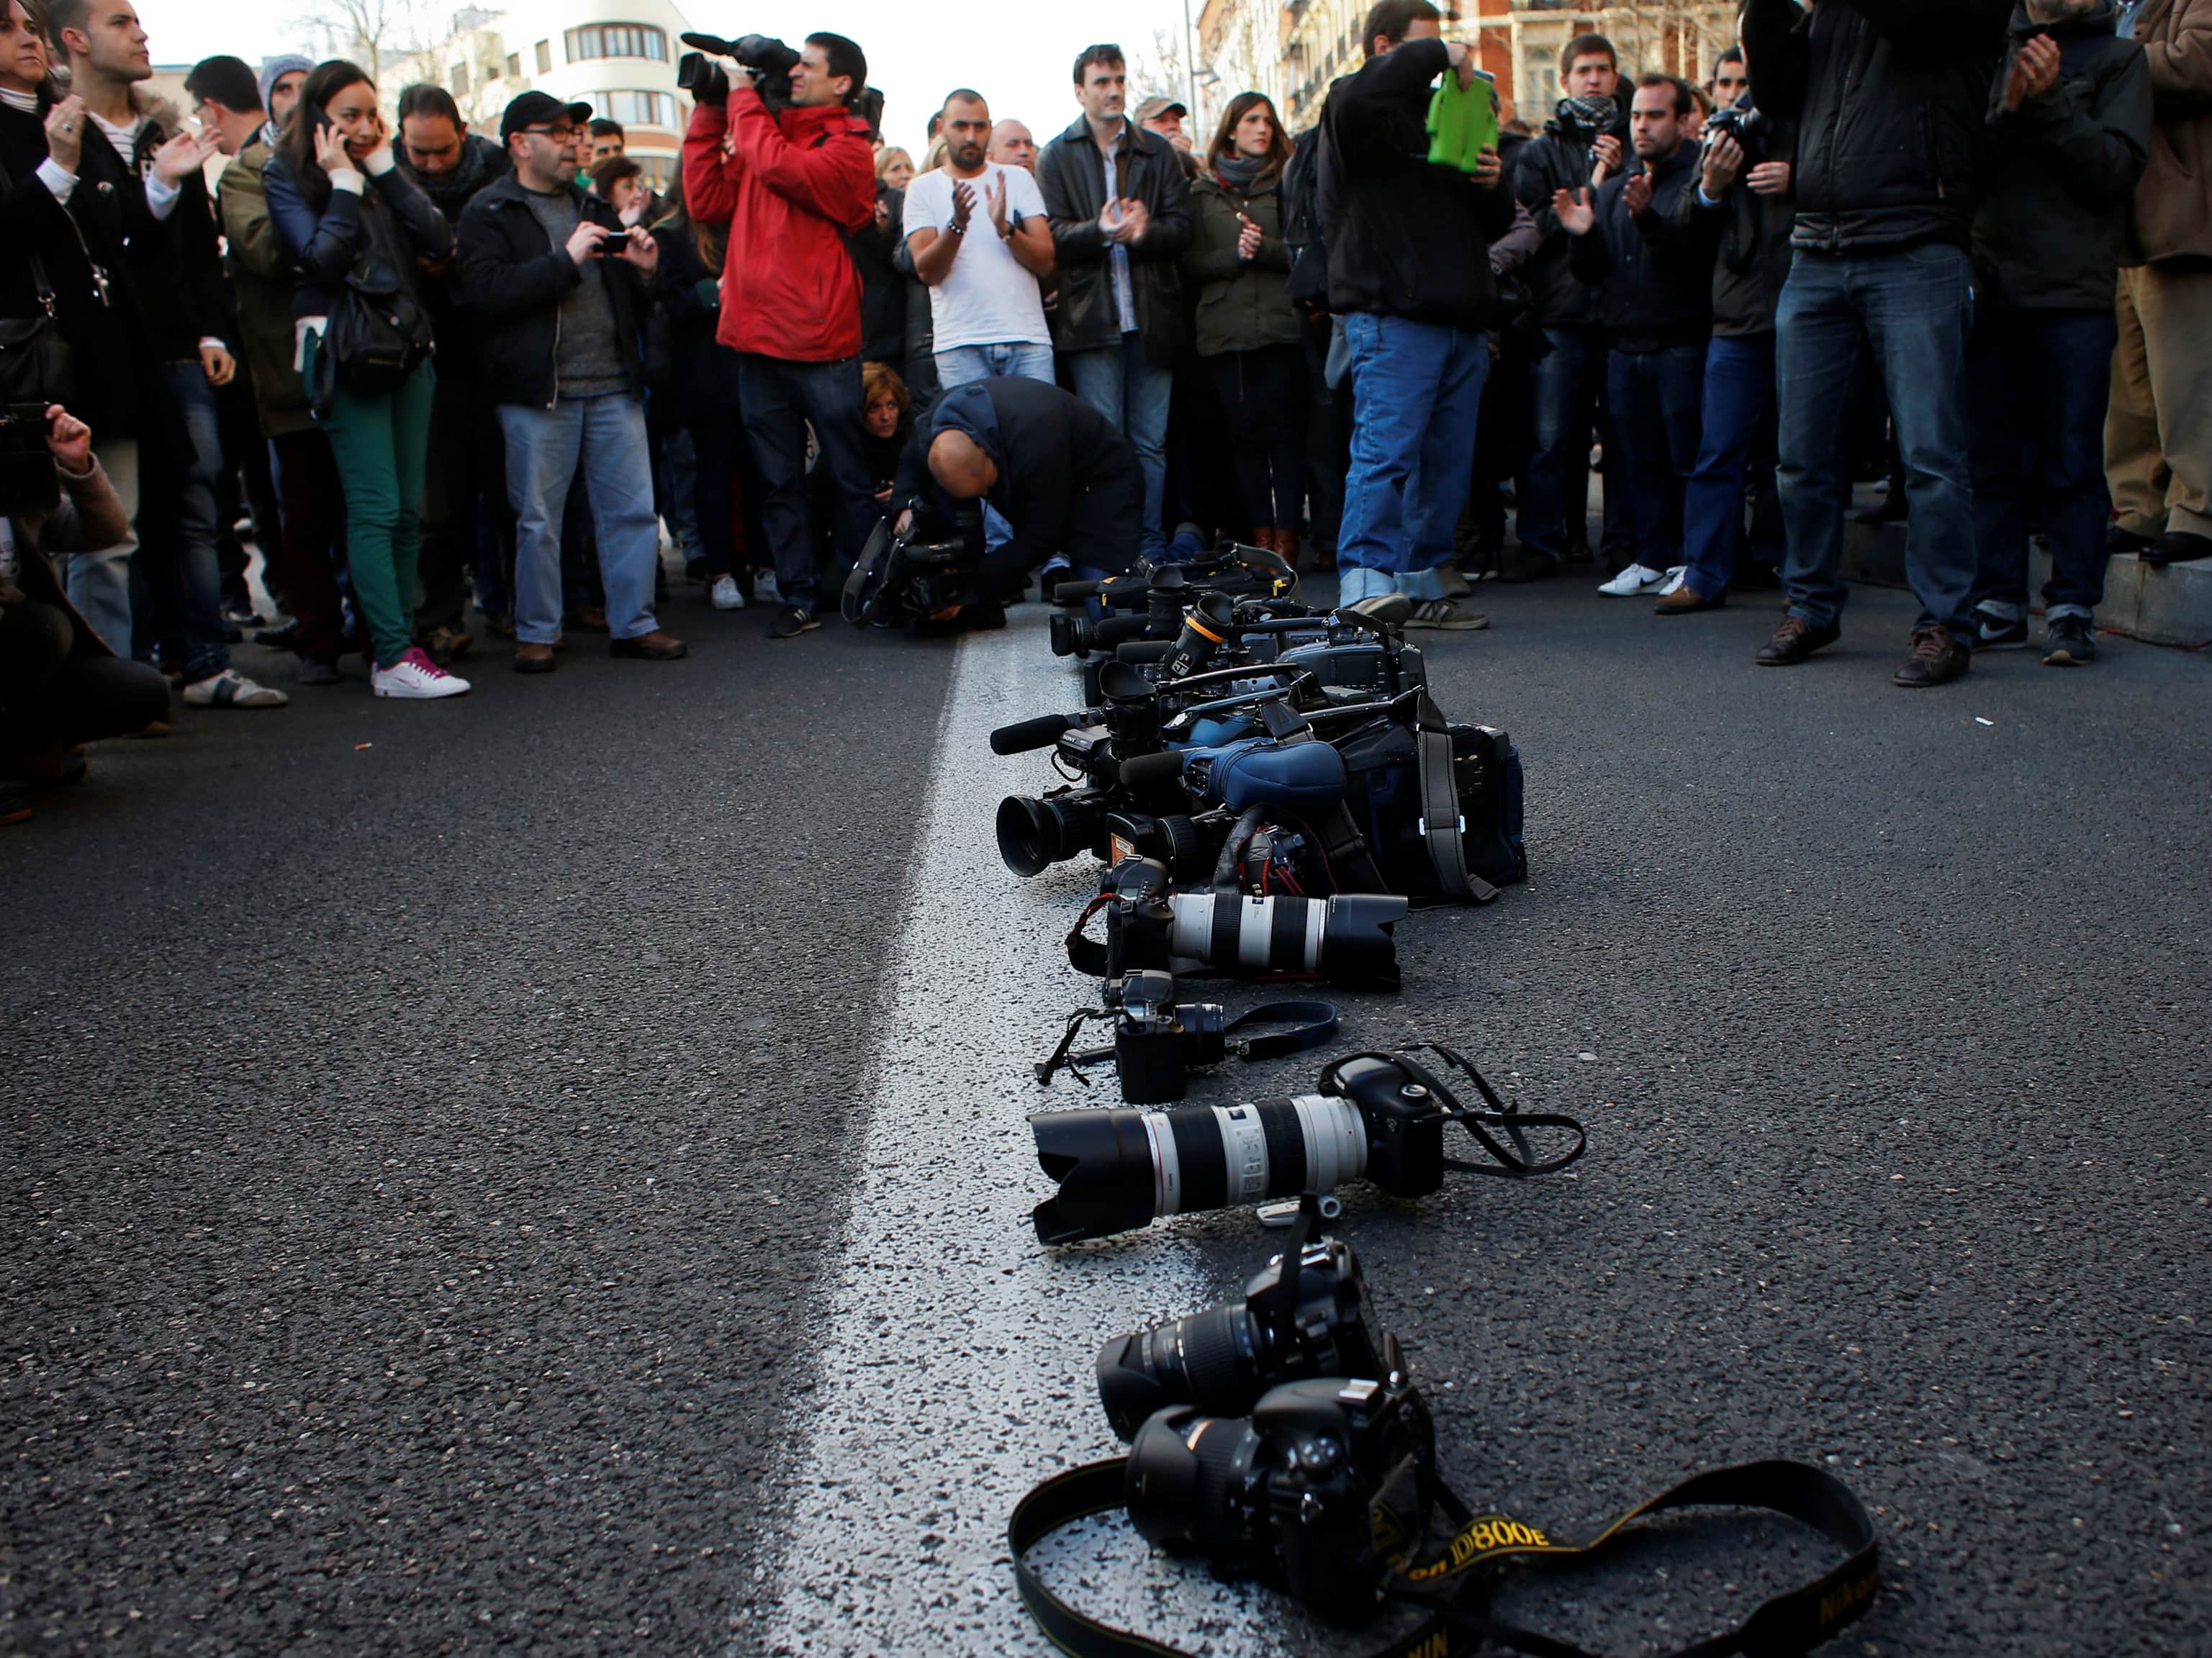 Spanish journalists and supporters stage a protest on the 10th anniversary of the death of cameraman Jose Couso in front of Madrid's U.S. embassy, 6 April 2013, REUTERS/Susana Vera